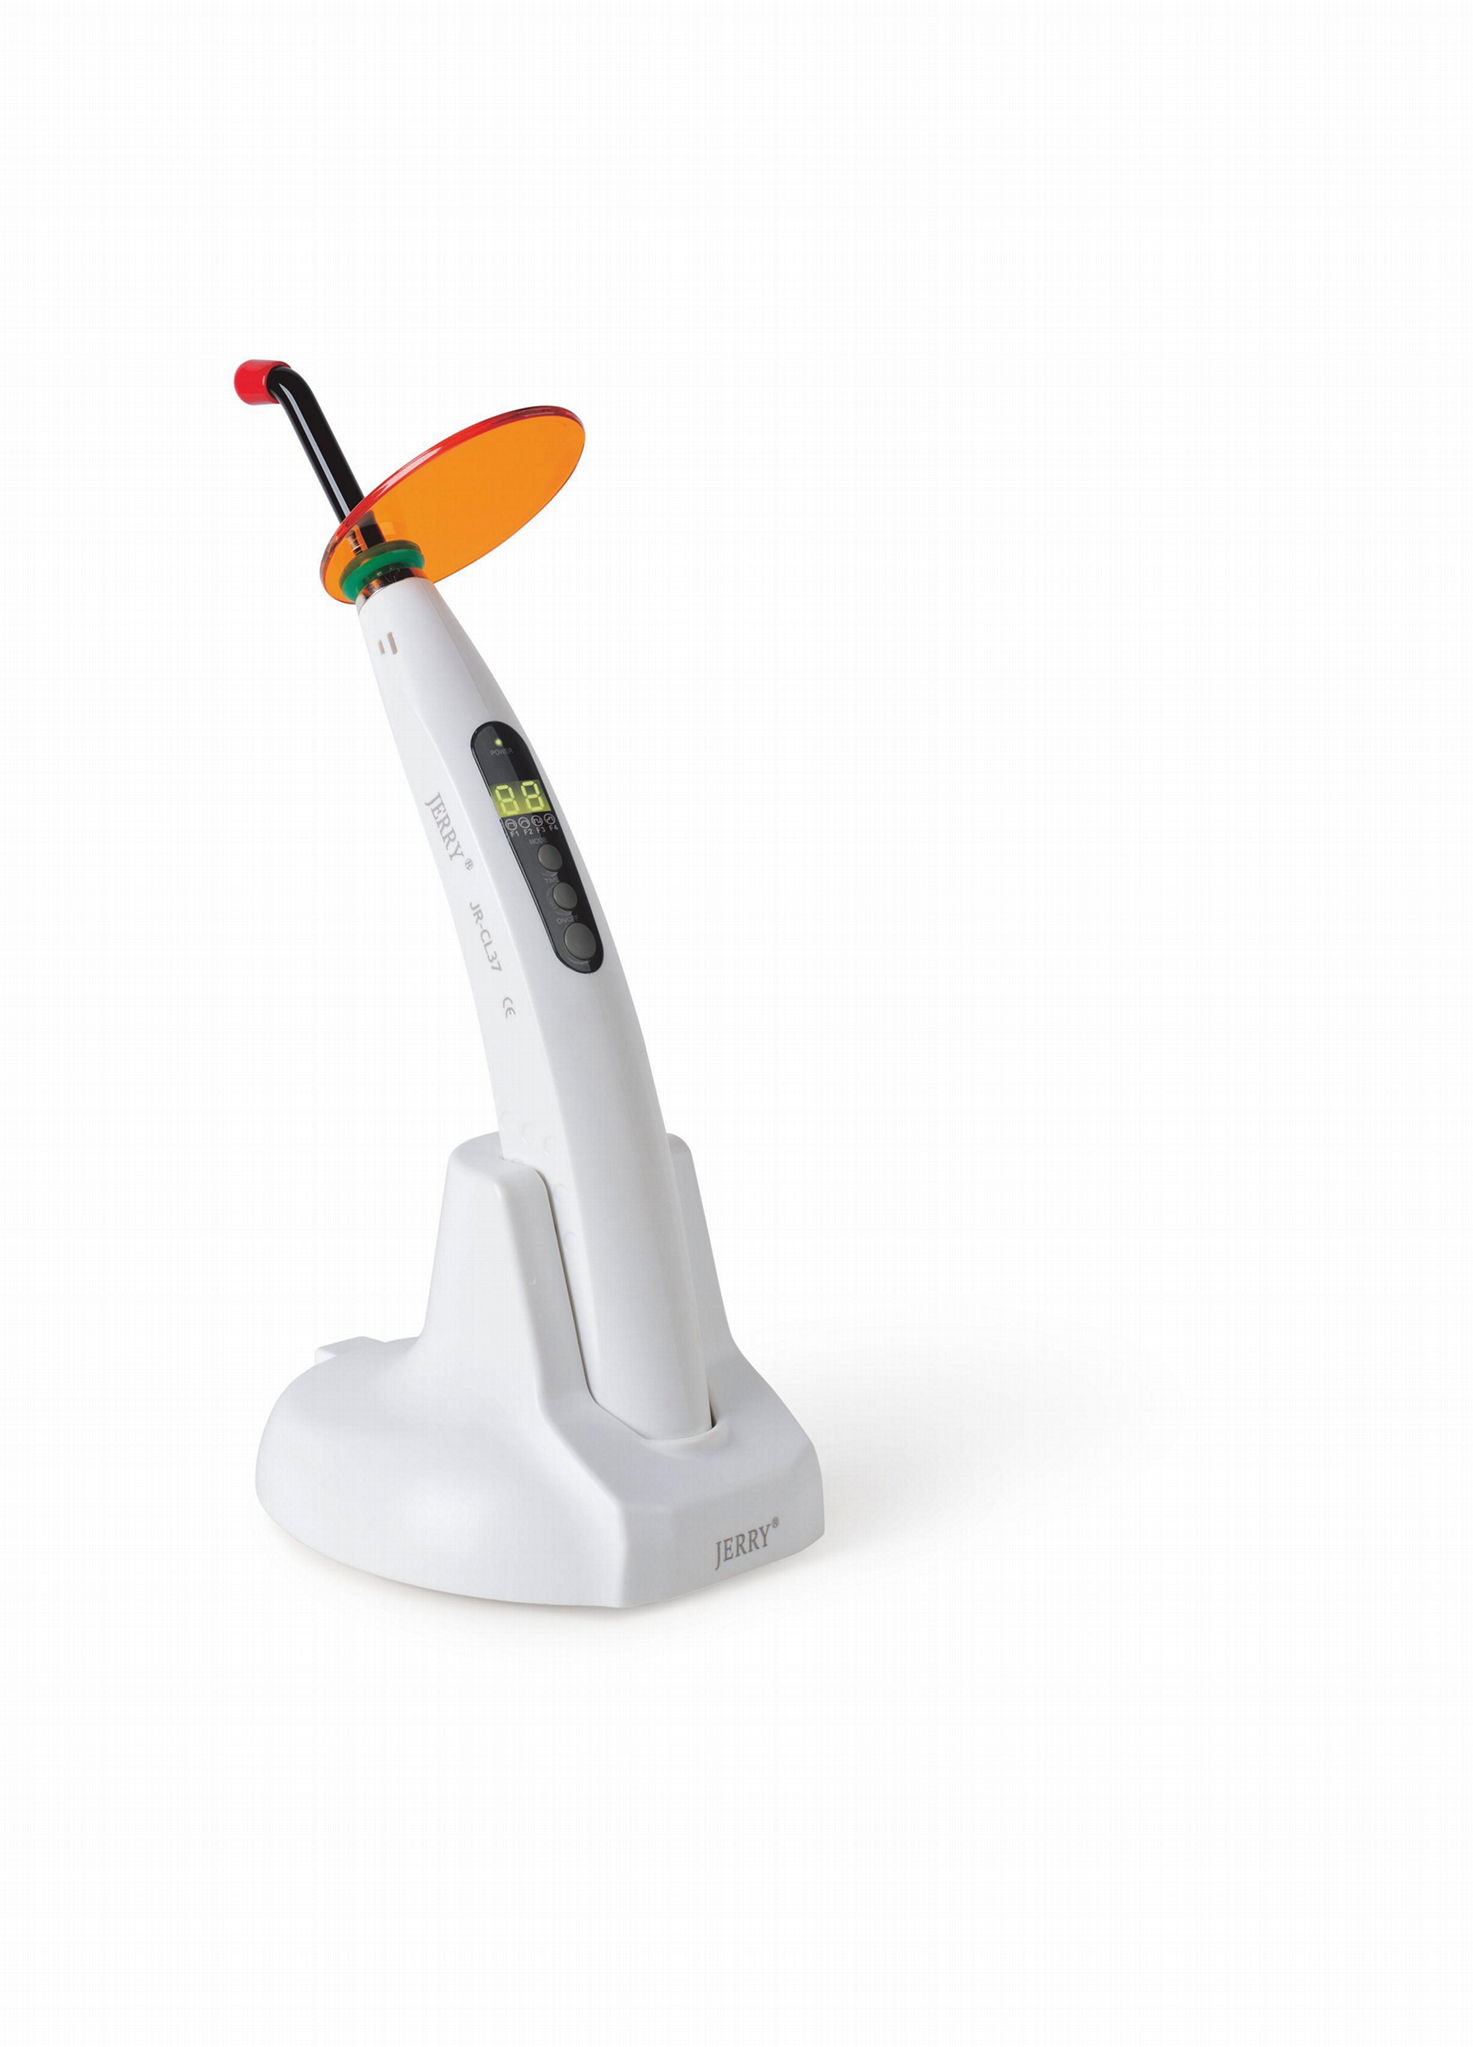 LED Curing light